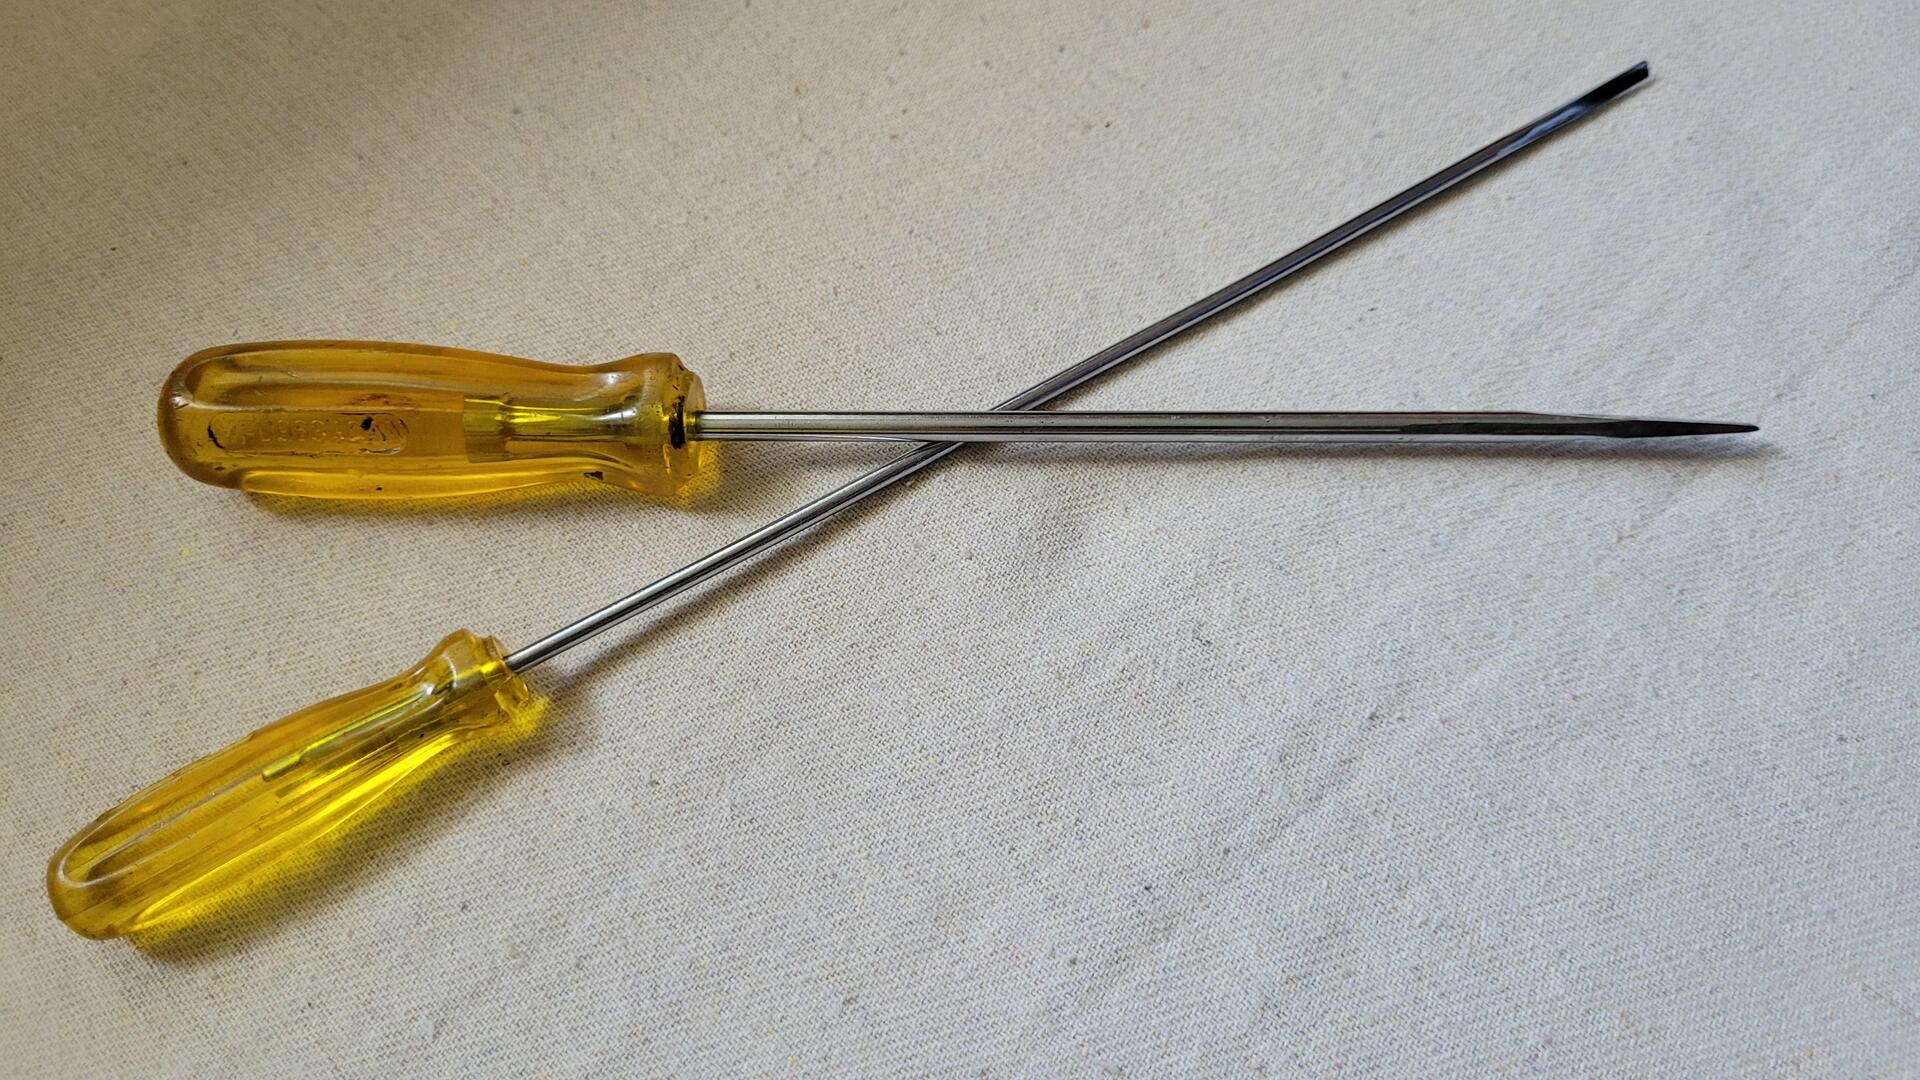 Rare MFD9634CAN and MFD9627CAN pair of vintage long classic Proto flat head screwdrivers with yellow unbreakable handles. Antique mid century made in Canada collectible hand tools